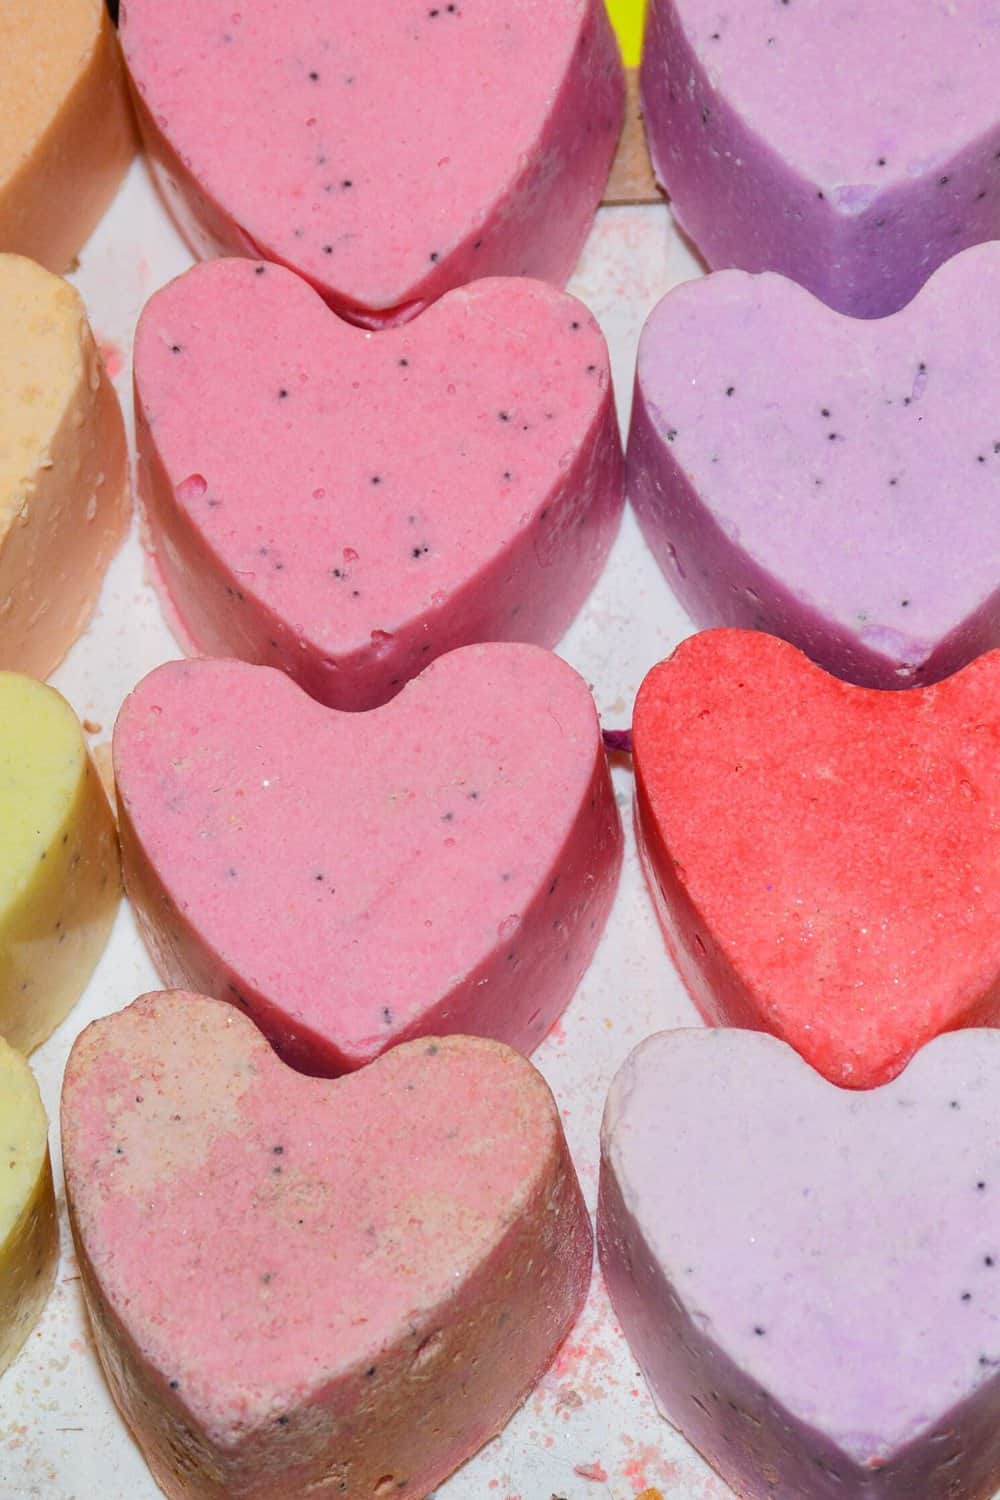 Several differently colored heart-shaped bath bombs.